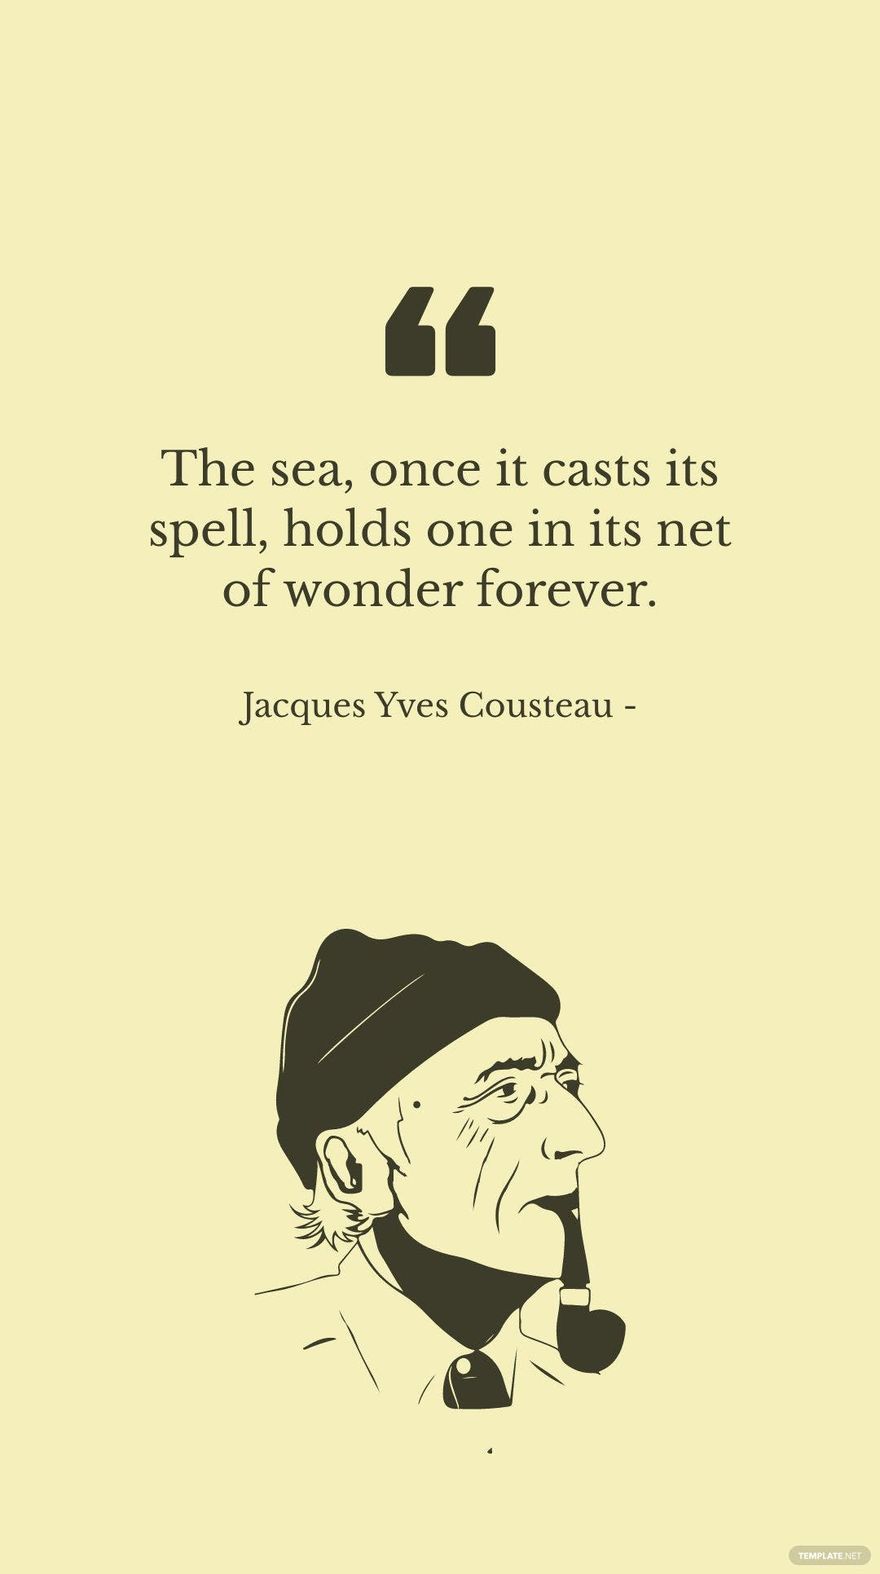 Jacques Yves Cousteau - The sea, once it casts its spell, holds one in its net of wonder forever.